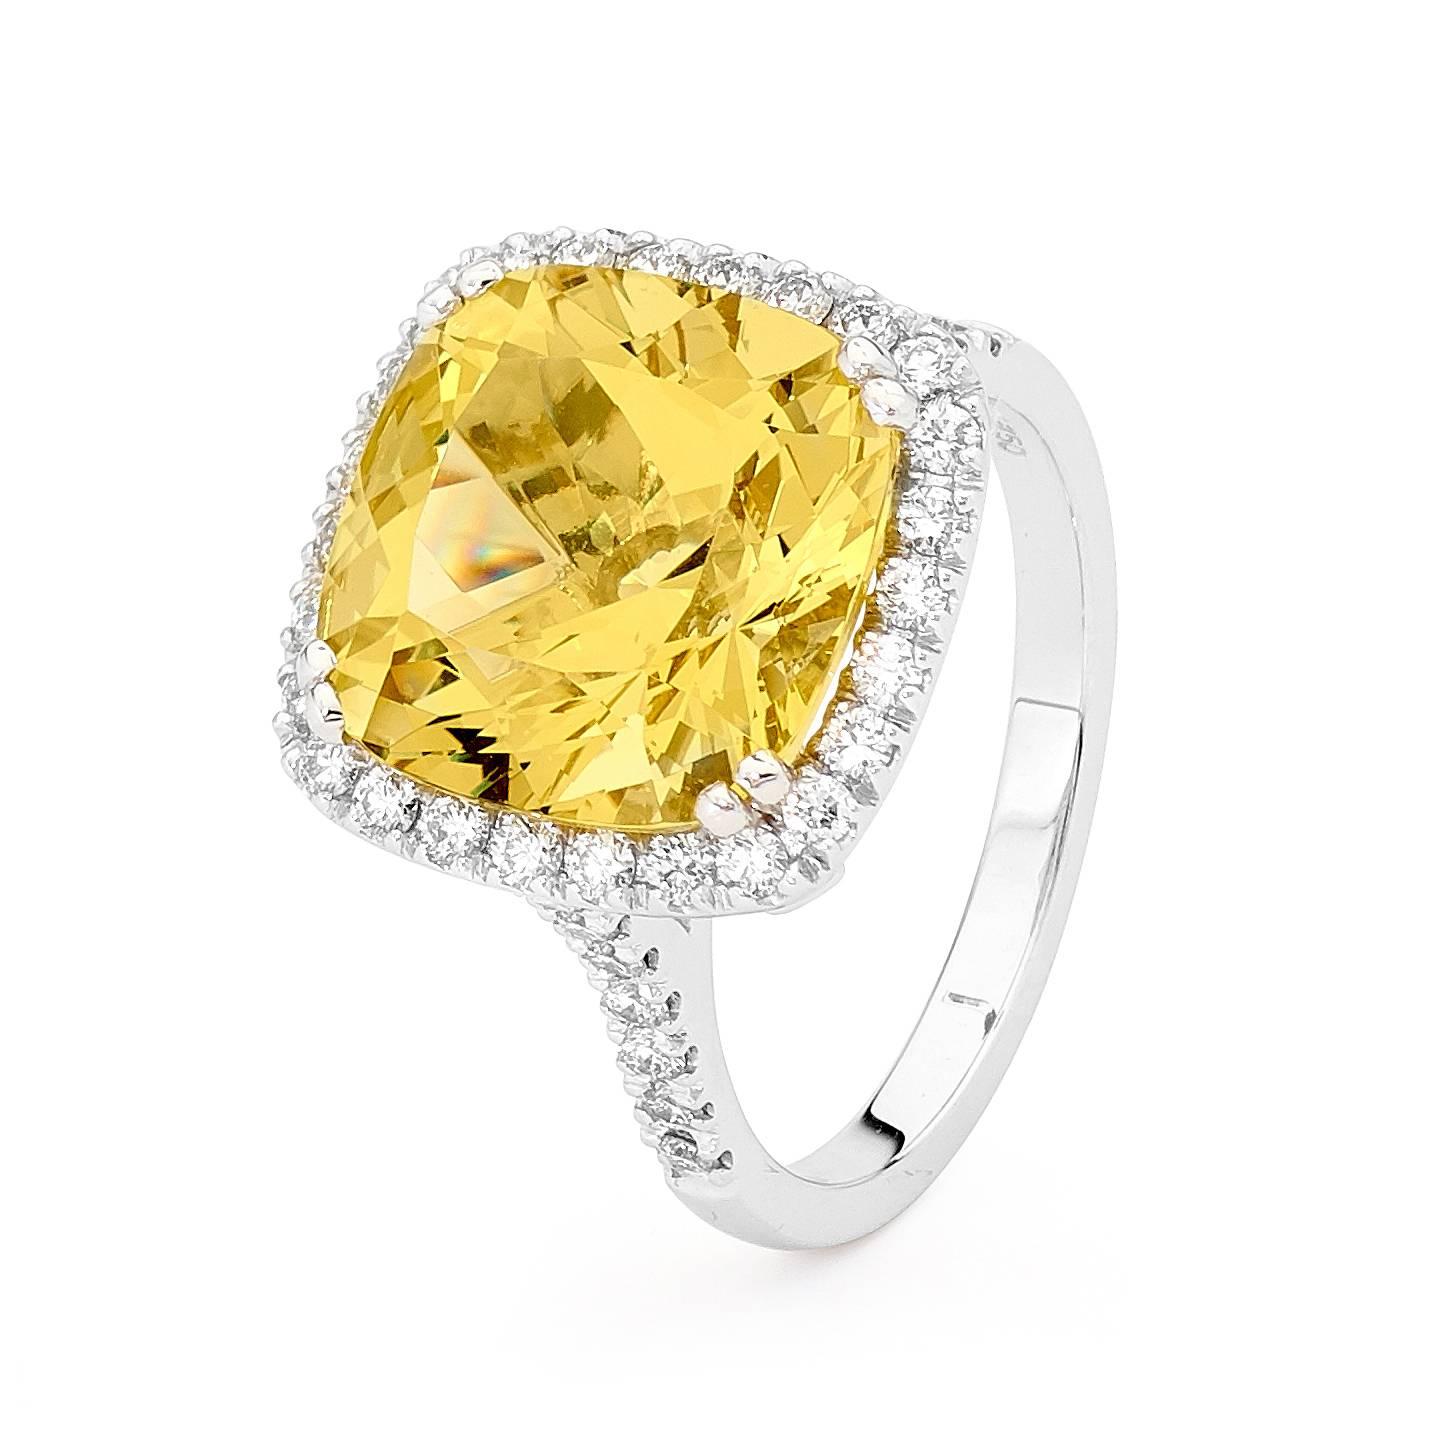 Our cushion cut Heliodor and Diamonds ring features a stunning 6.75ct cushion cut Heliodor gemstone at its centre (comes from Beryl's family), surrounded by 42 diamonds (weighing 0.59ct color FG / VS-SI), set with 18ct white gold to showcase the